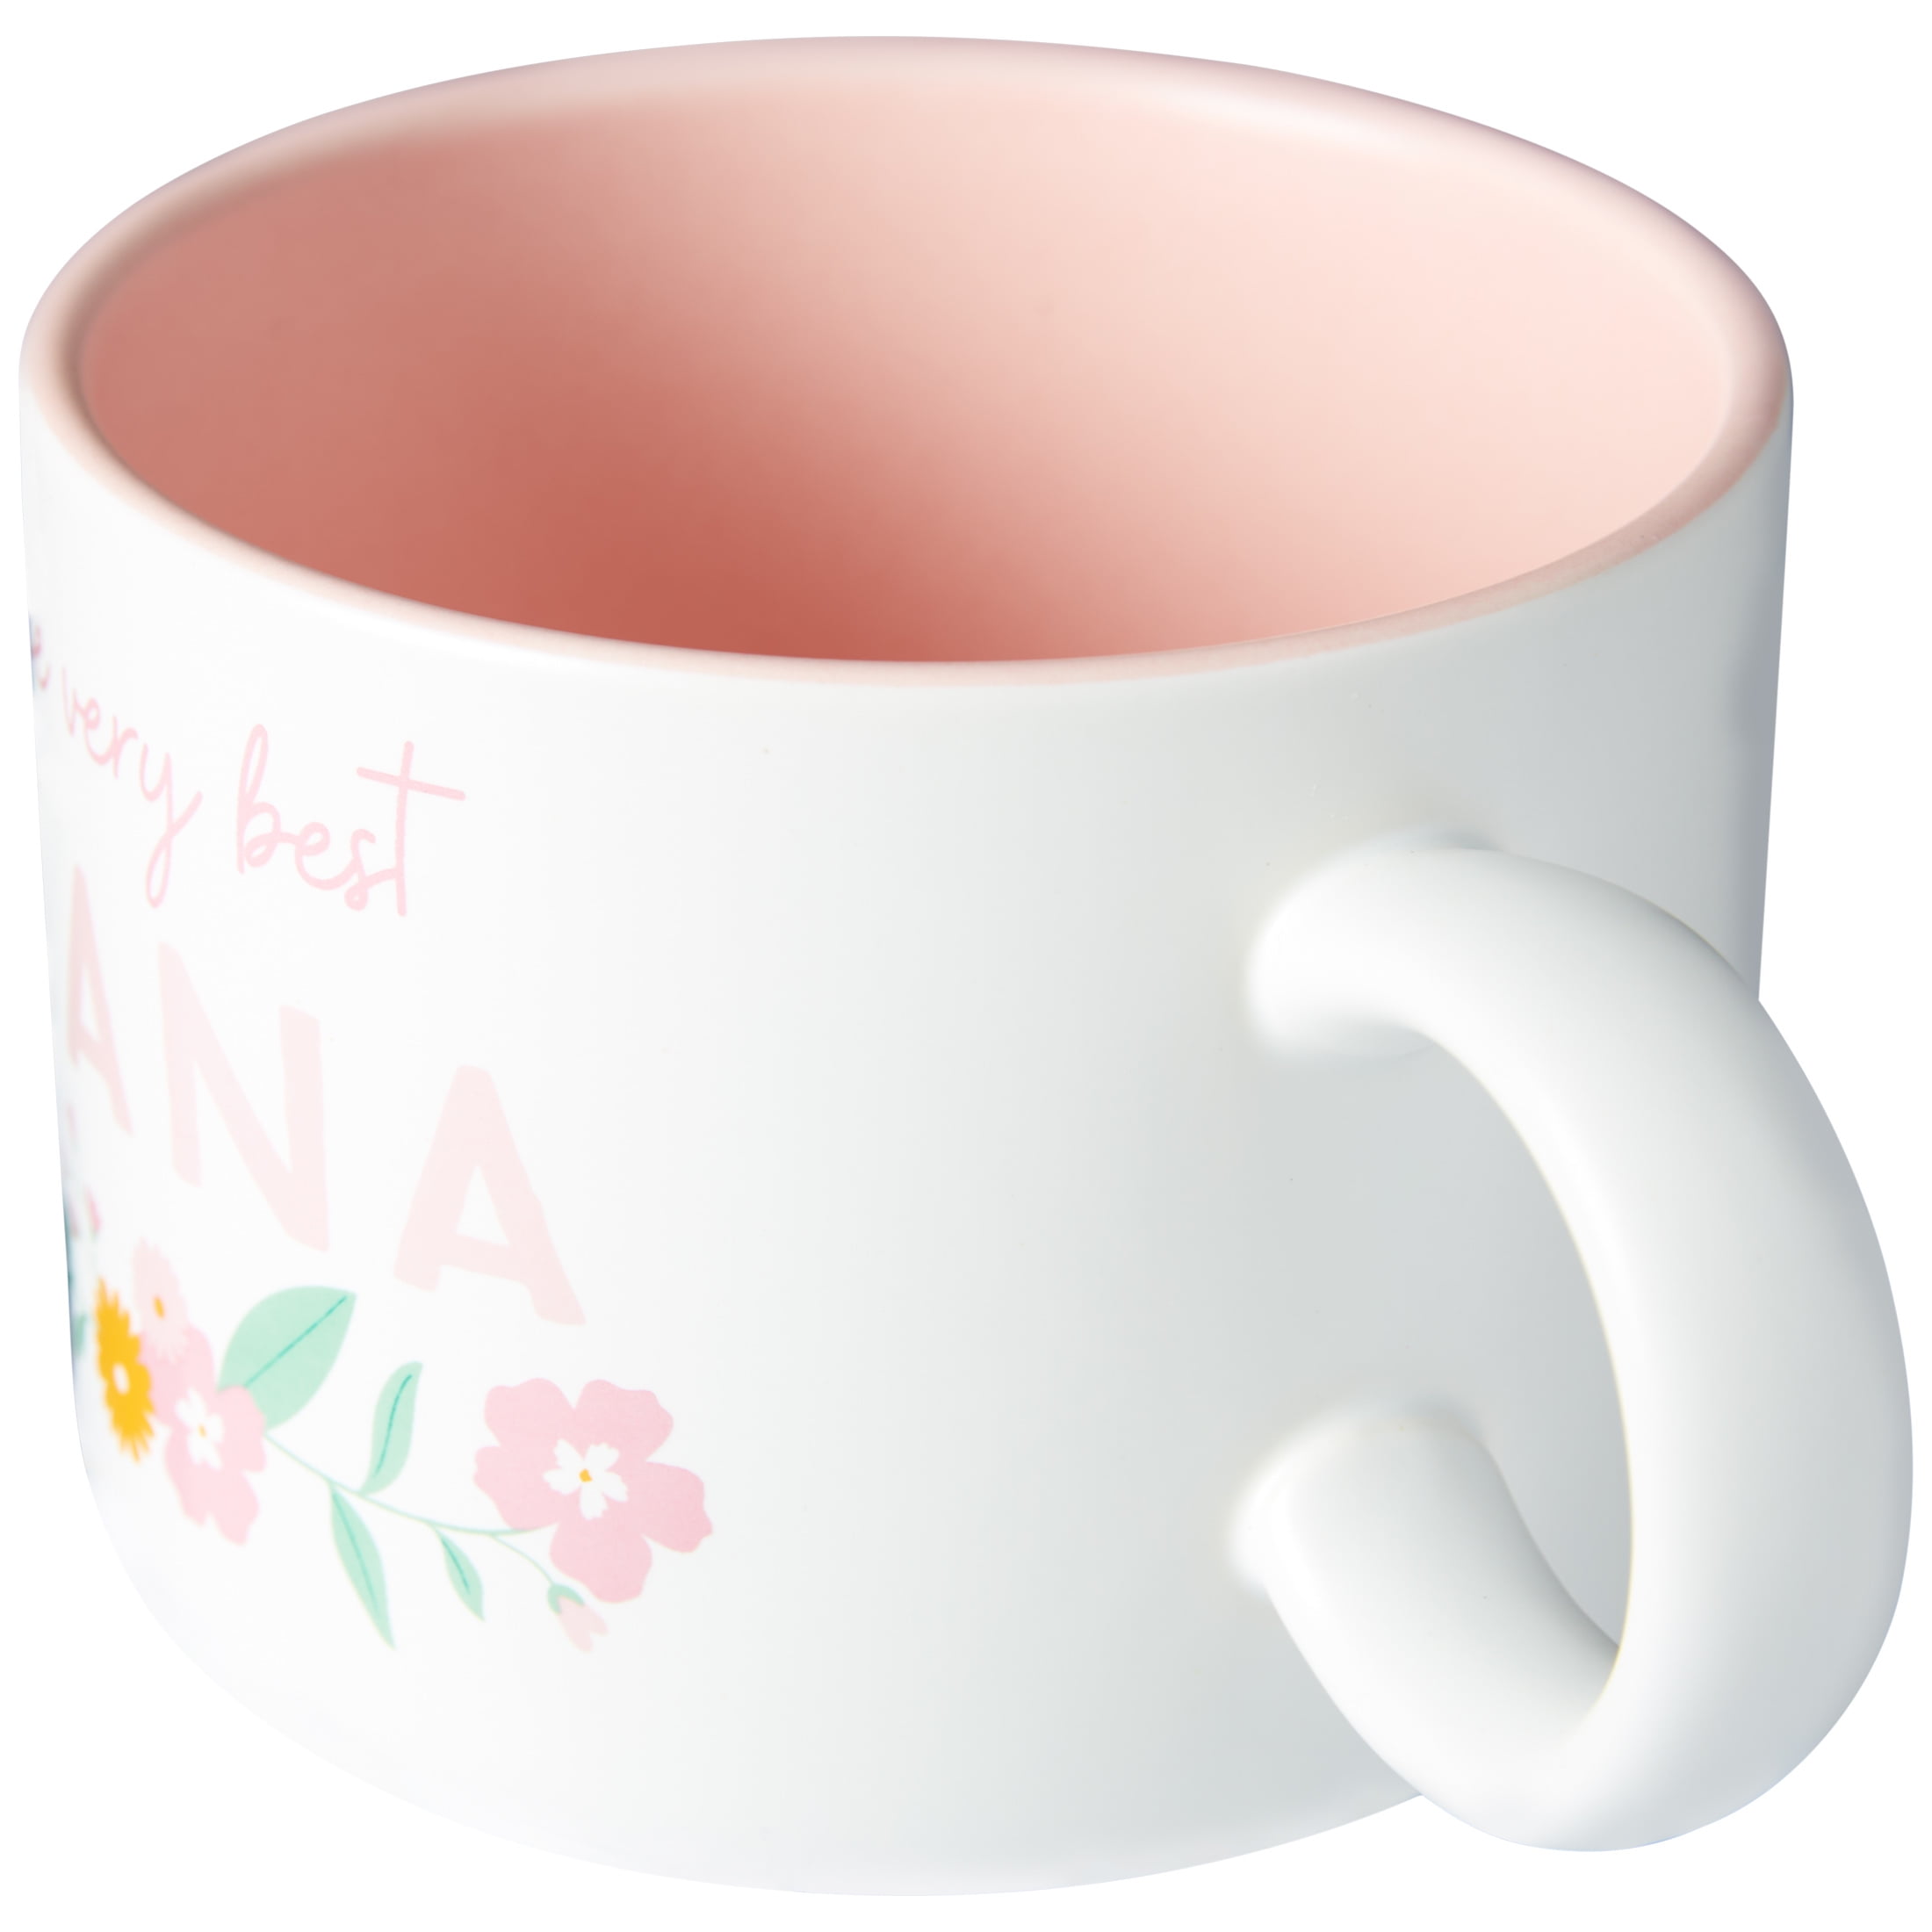 Ceramic New Mommy Mug Description: The perfect gift to perk up the new mom!  Ceramic Mug holds up to 15 ozs. Wa…